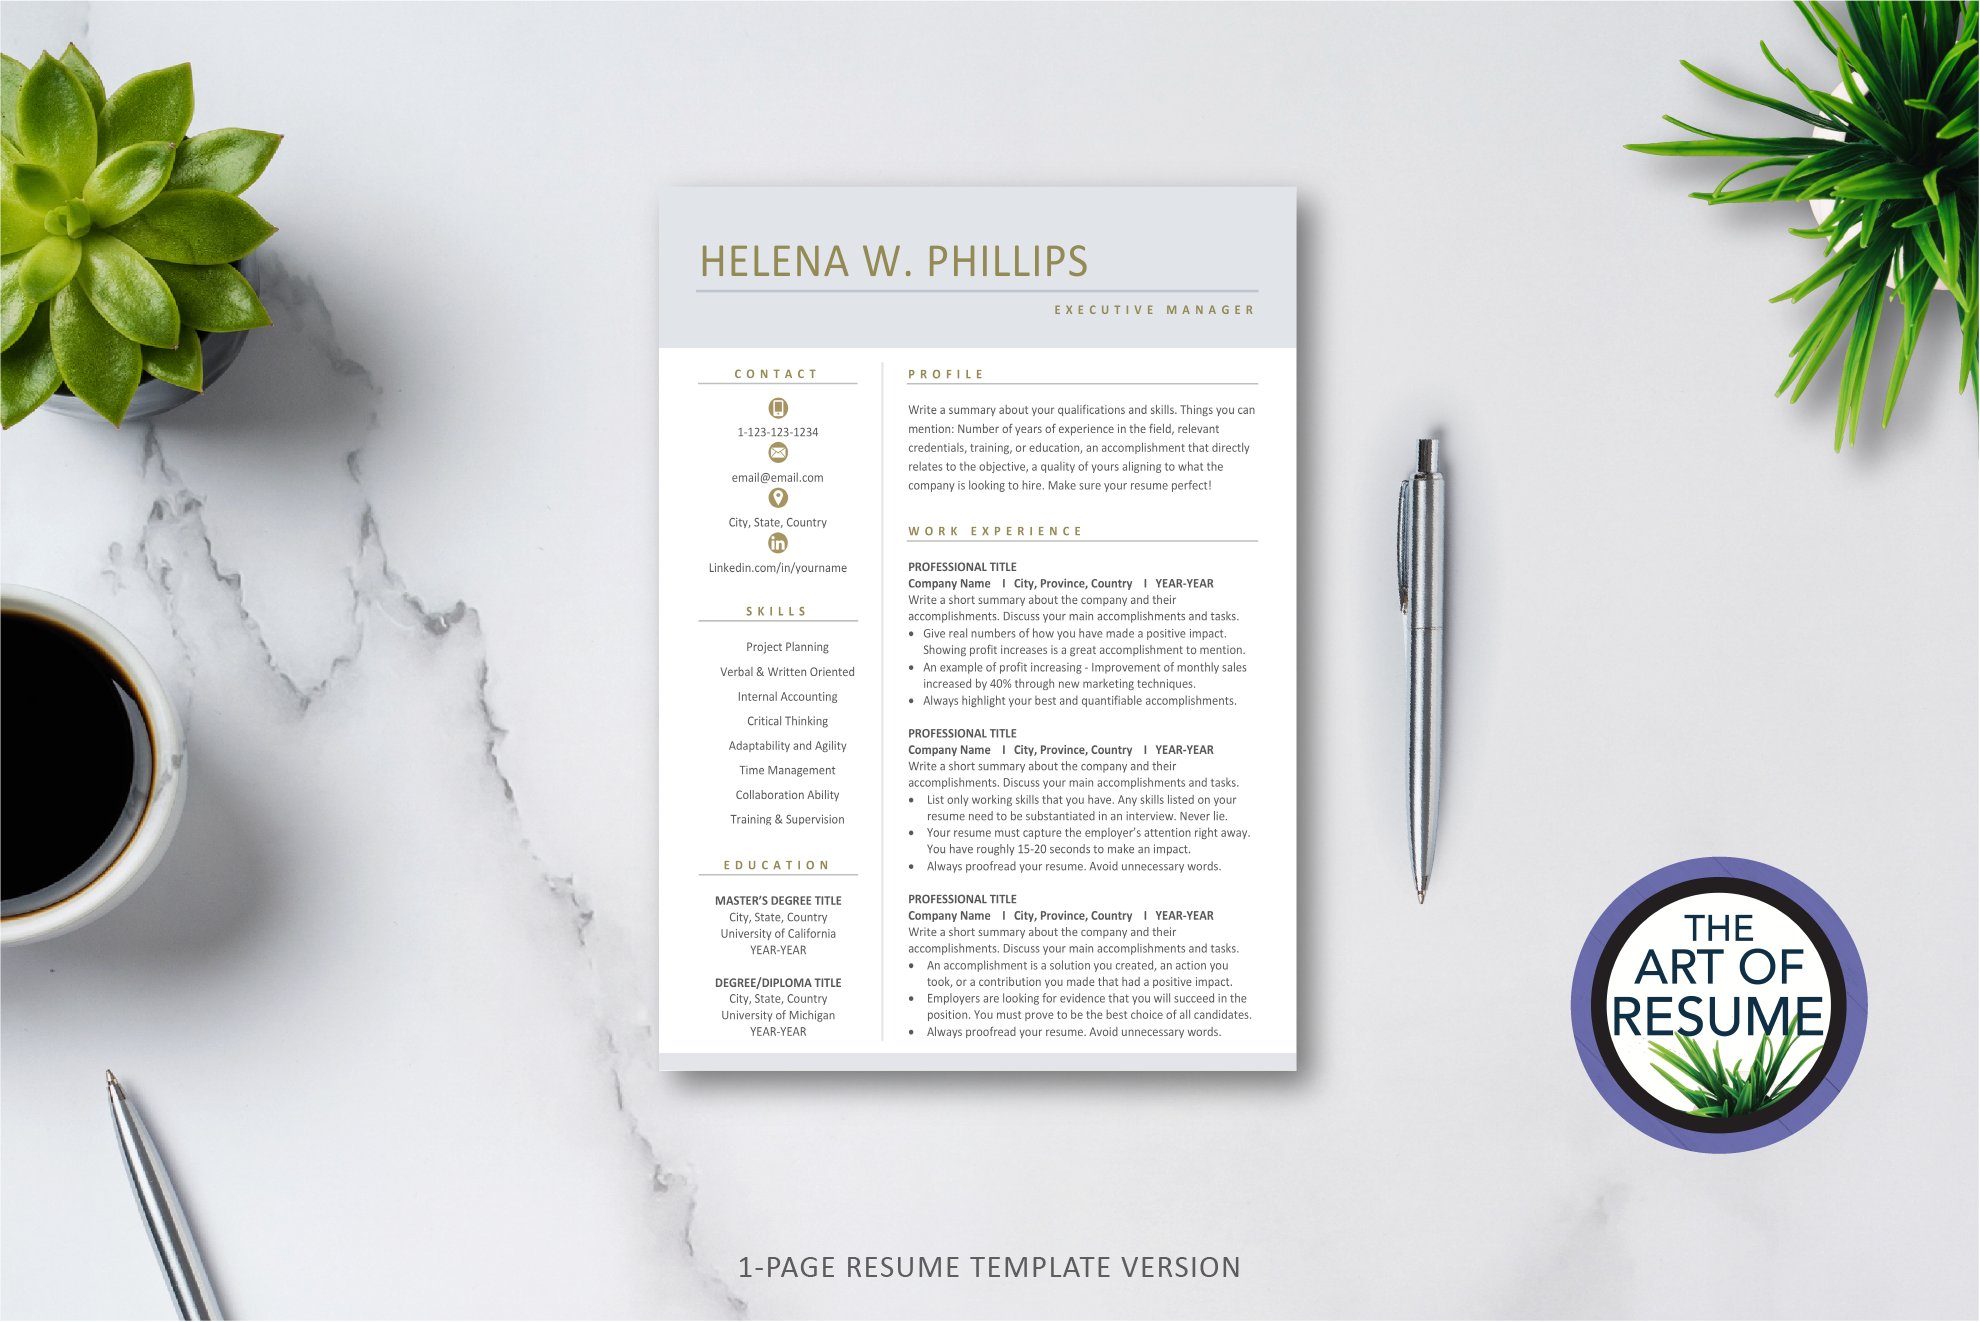 2 one 281129resume template 884